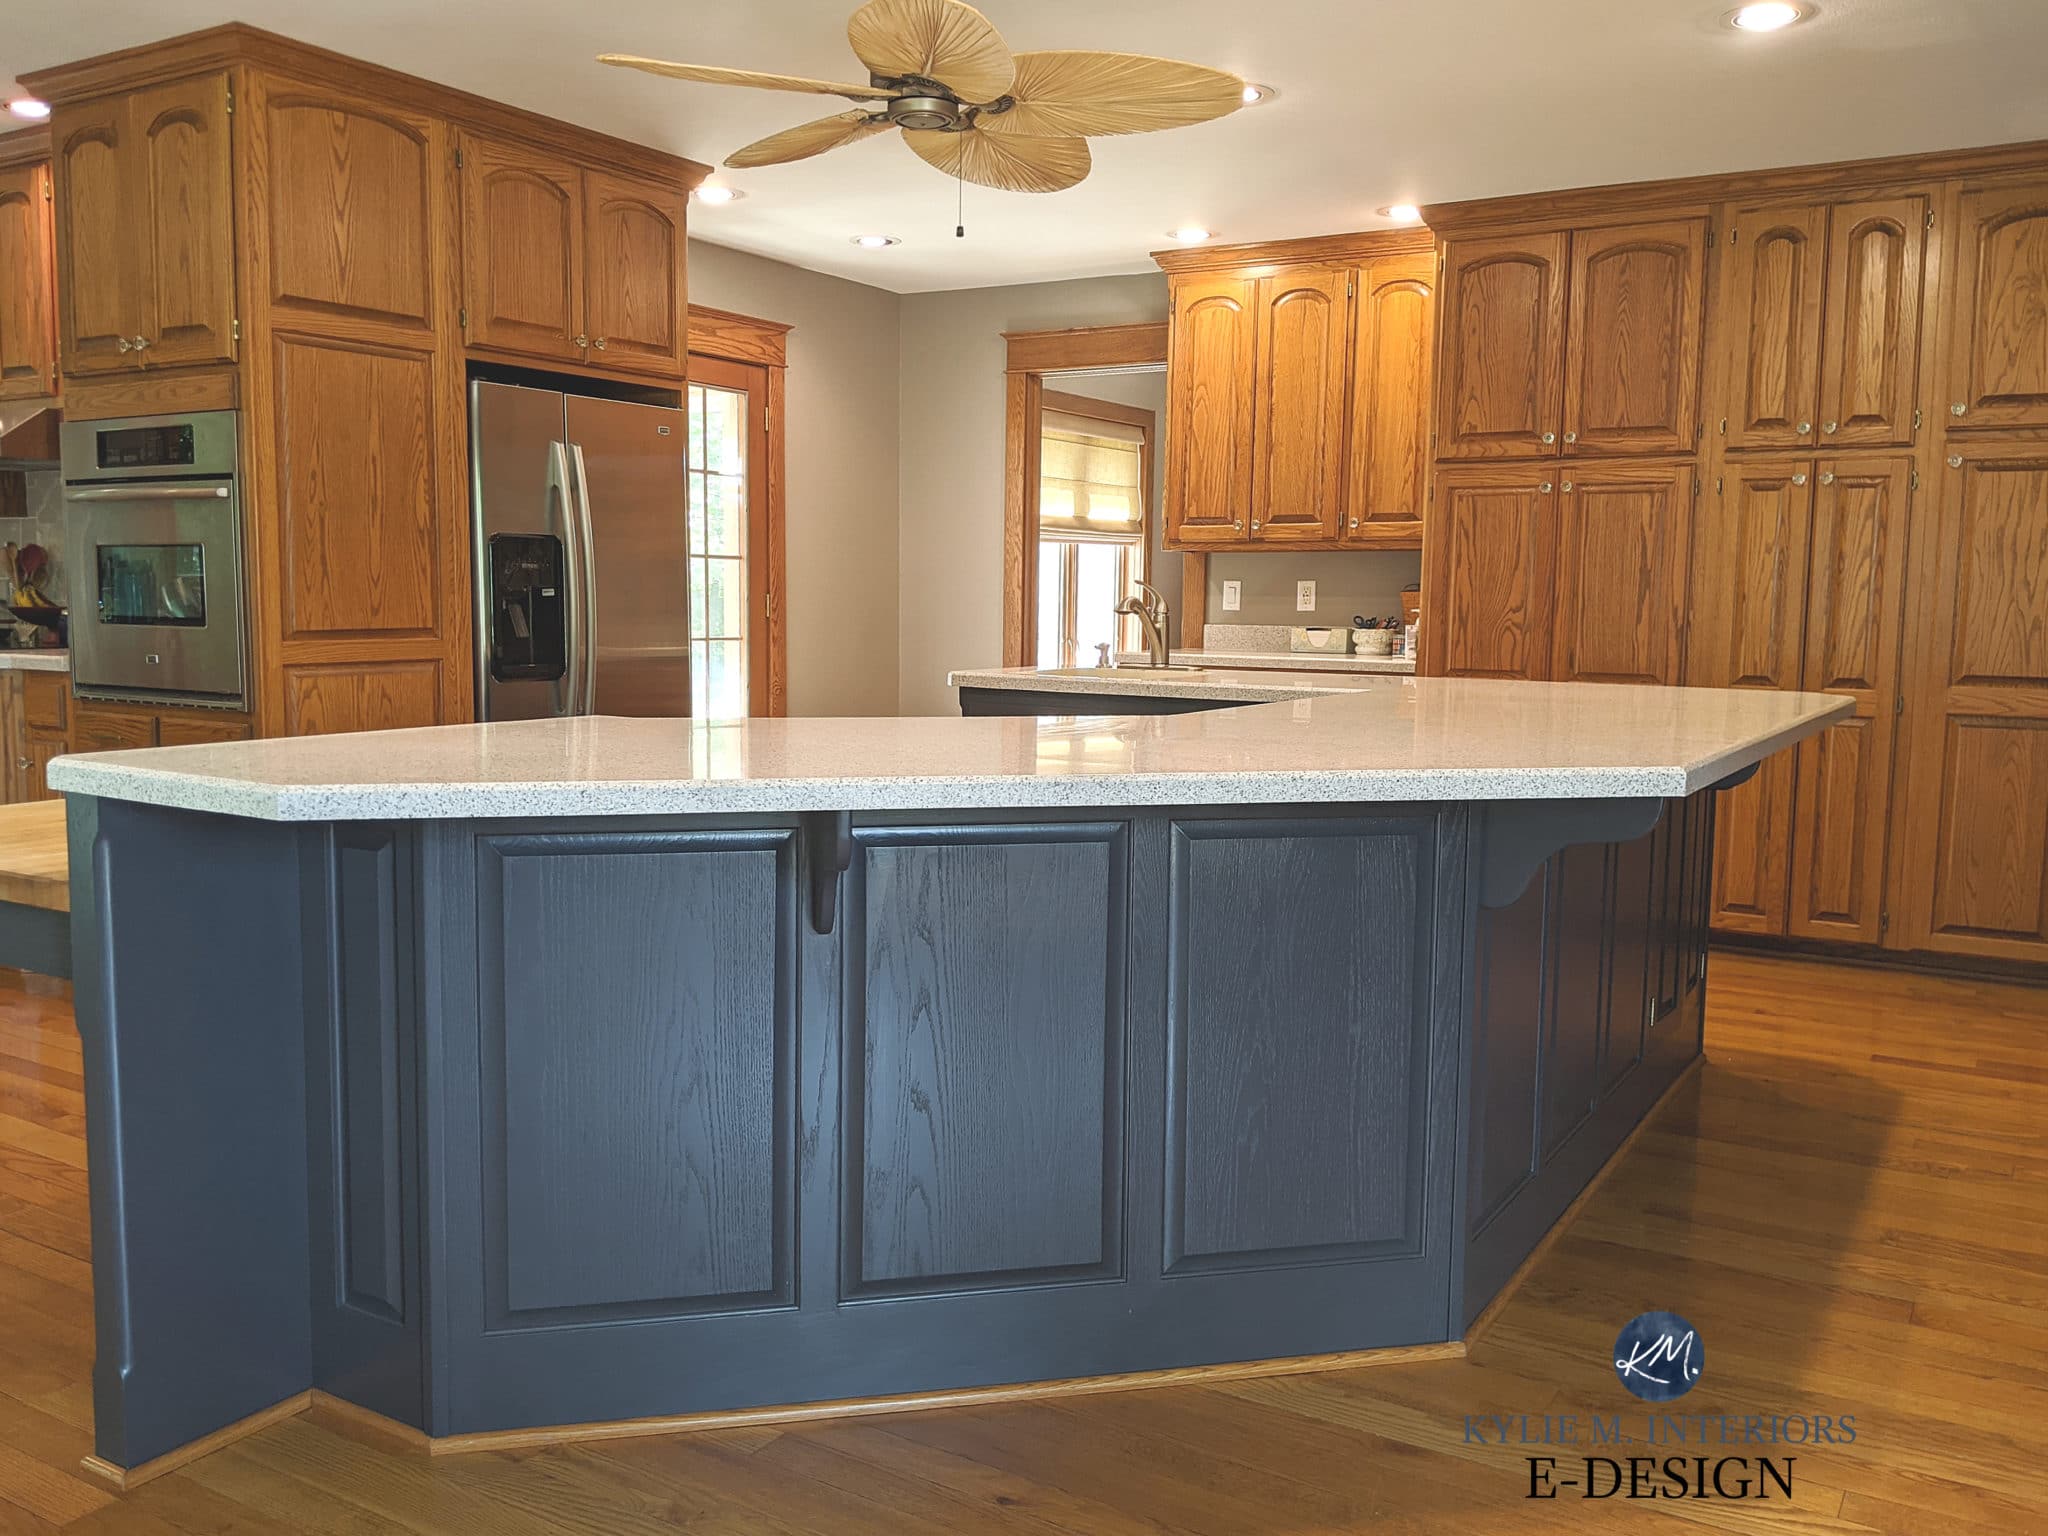 best paint finish for kitchen table